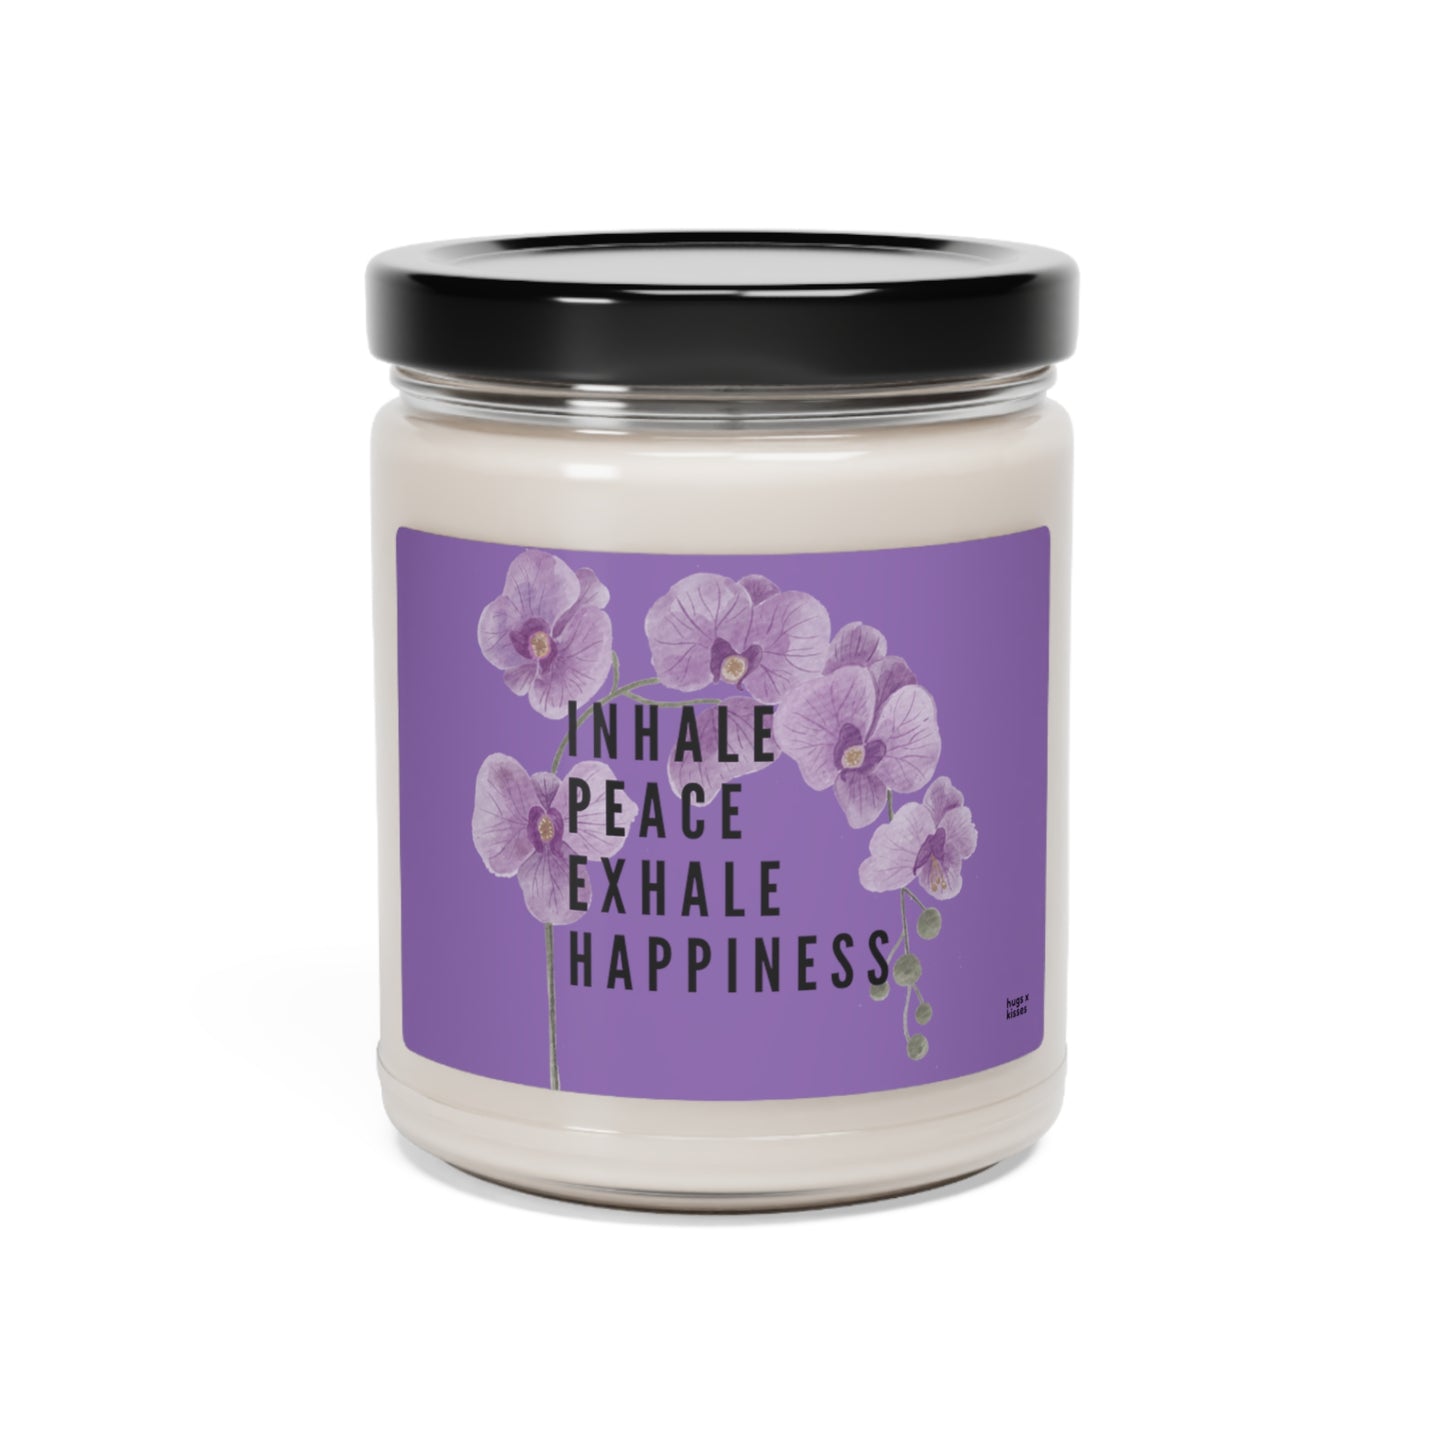 Inhale & Exhale Scented Candle, 9oz